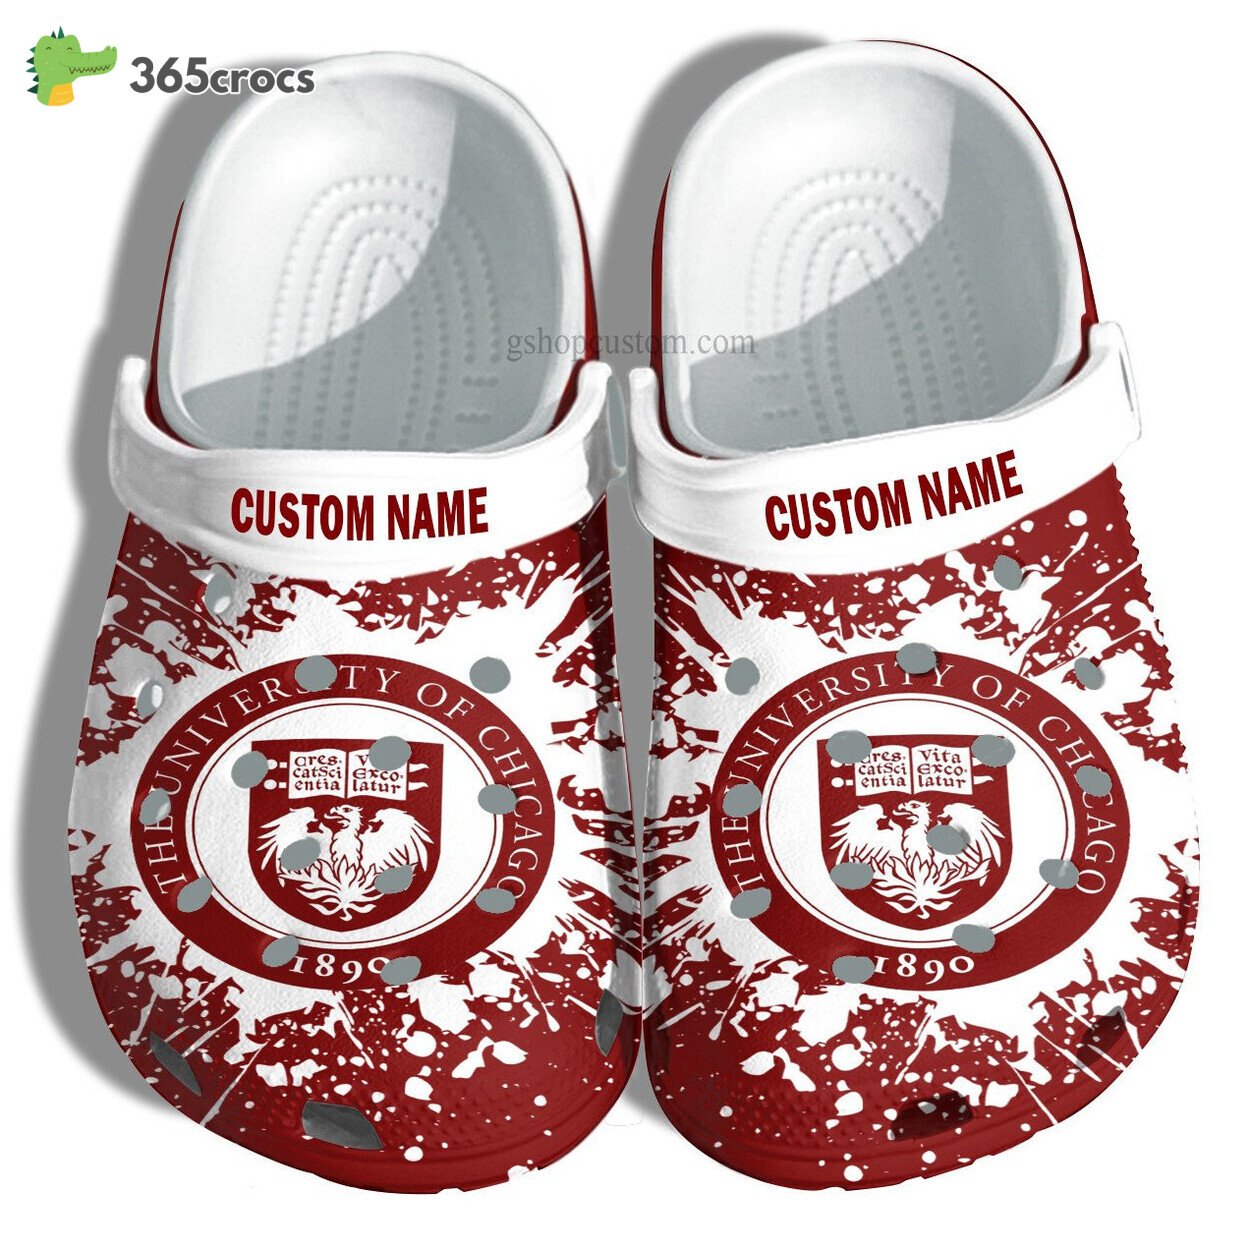 University Of Chicago Graduation Gifts Croc Shoes Customize Admission Gift Shoes